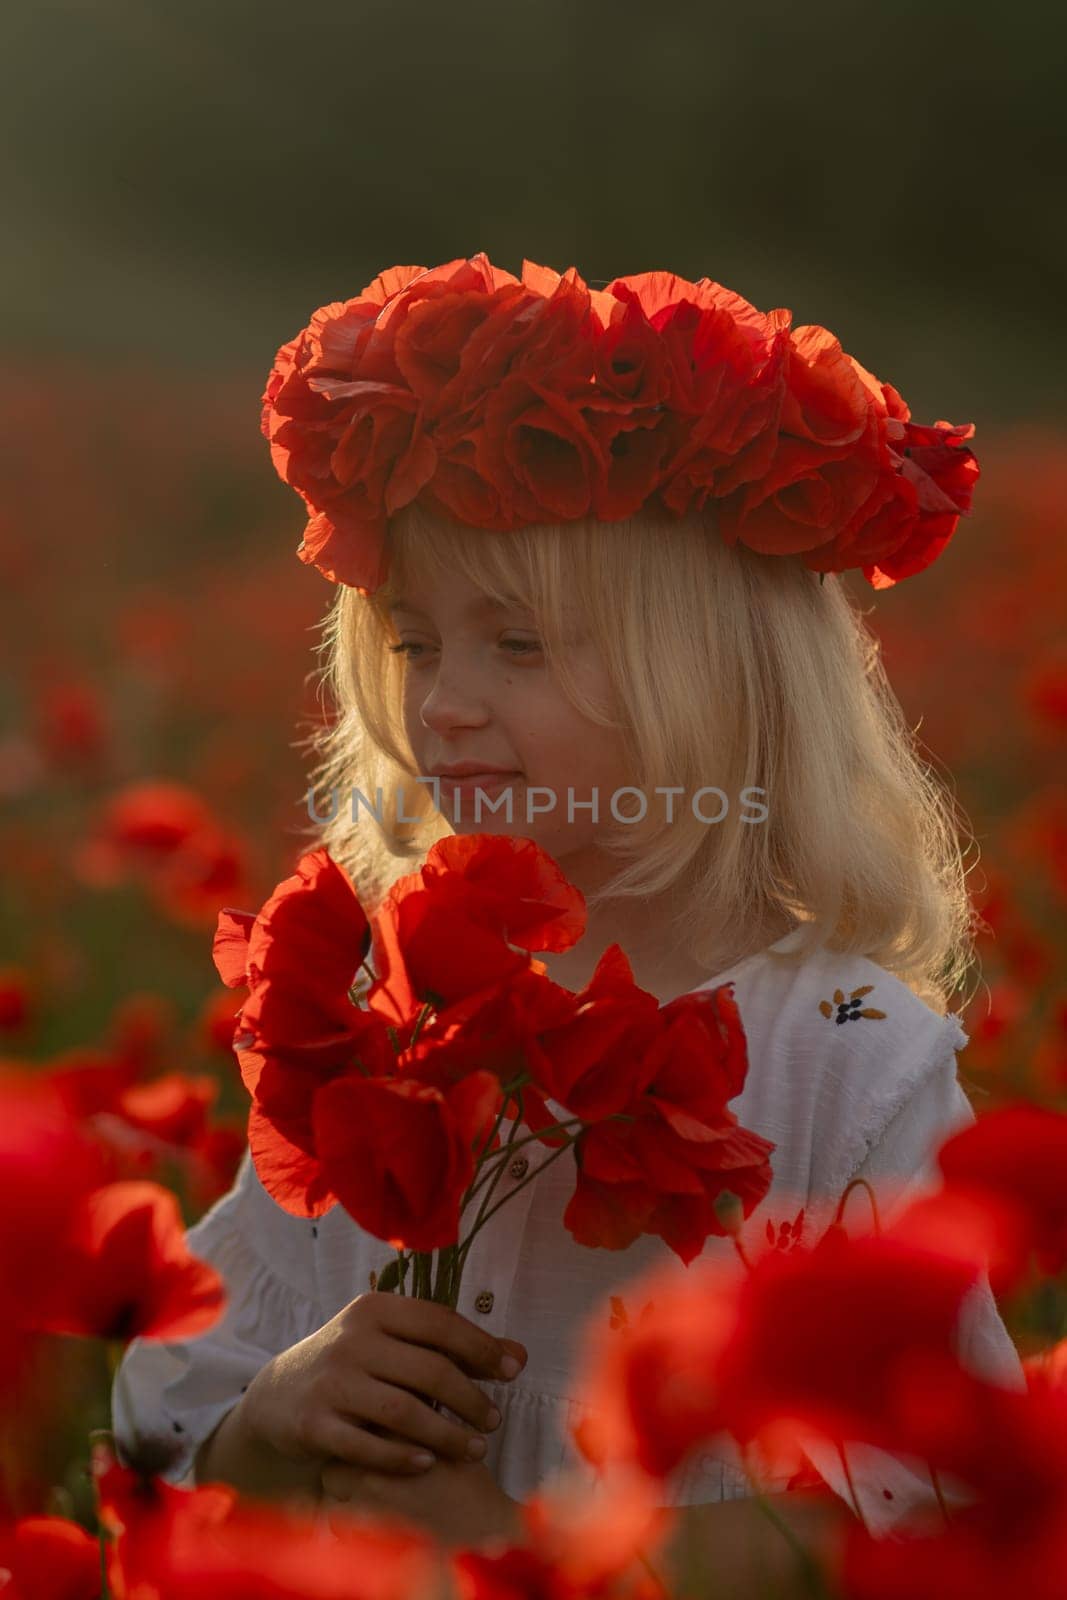 A young girl wearing a red flower crown is standing in a field of red flowers. She is holding a bouquet of red flowers in her hand. Concept of innocence and joy. by Matiunina